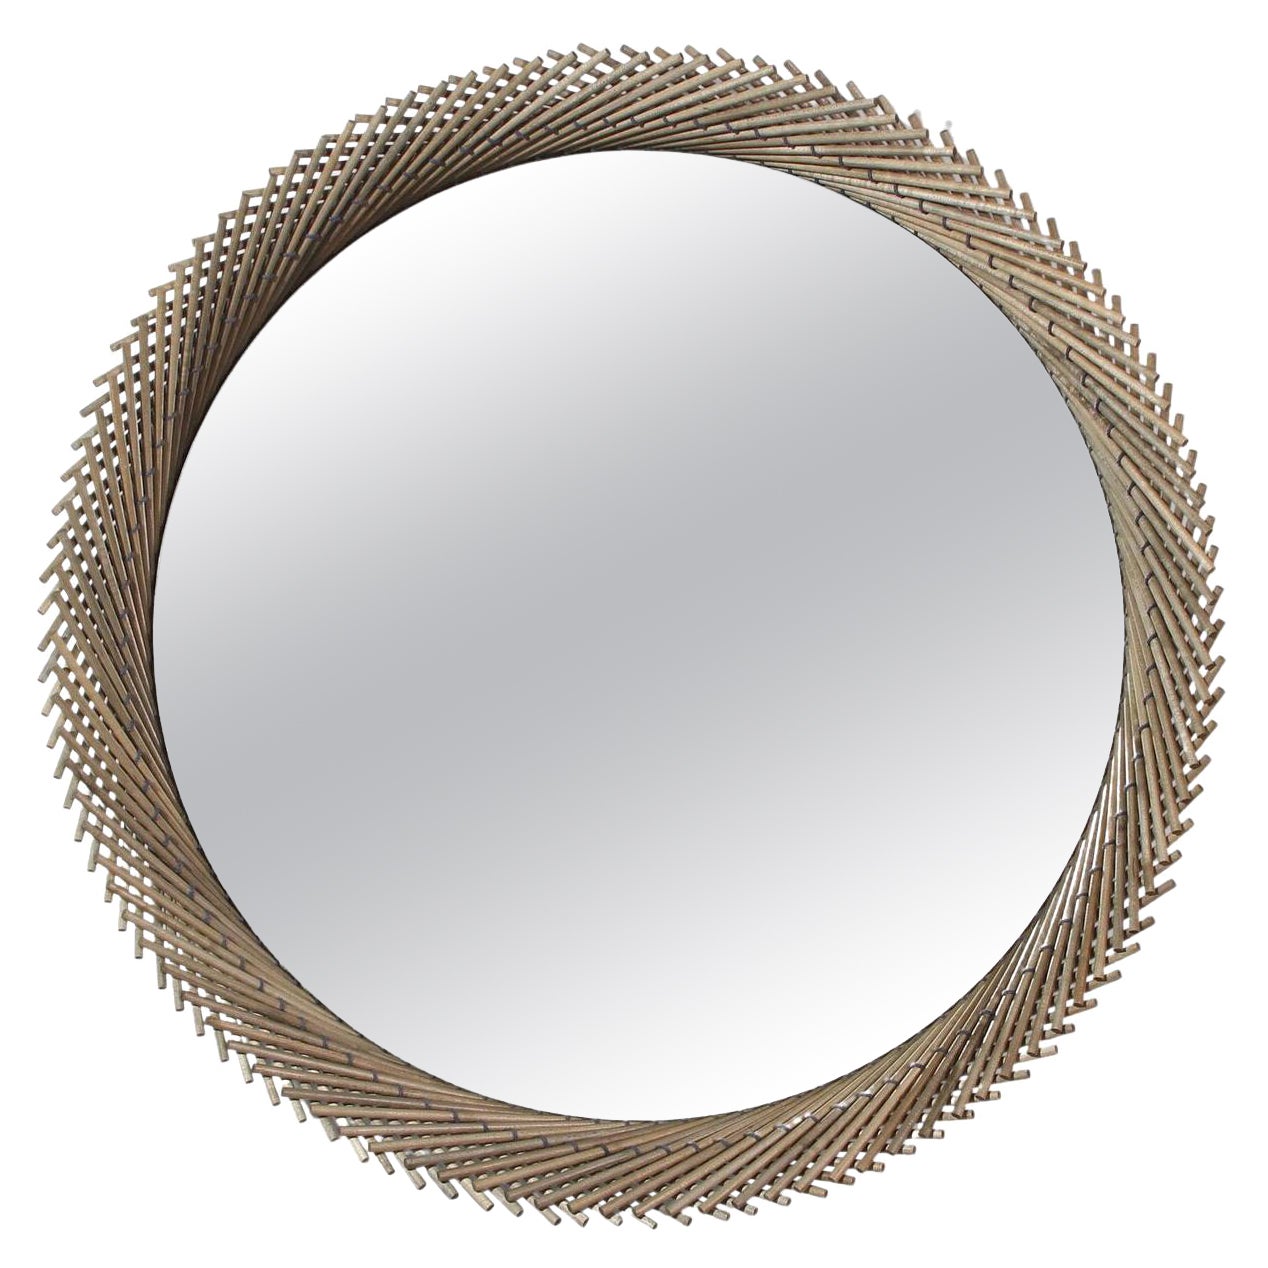 Mooda Round Mirror 30 / Oxidized Maple Wood, Clear Mirror by INDO- For Sale